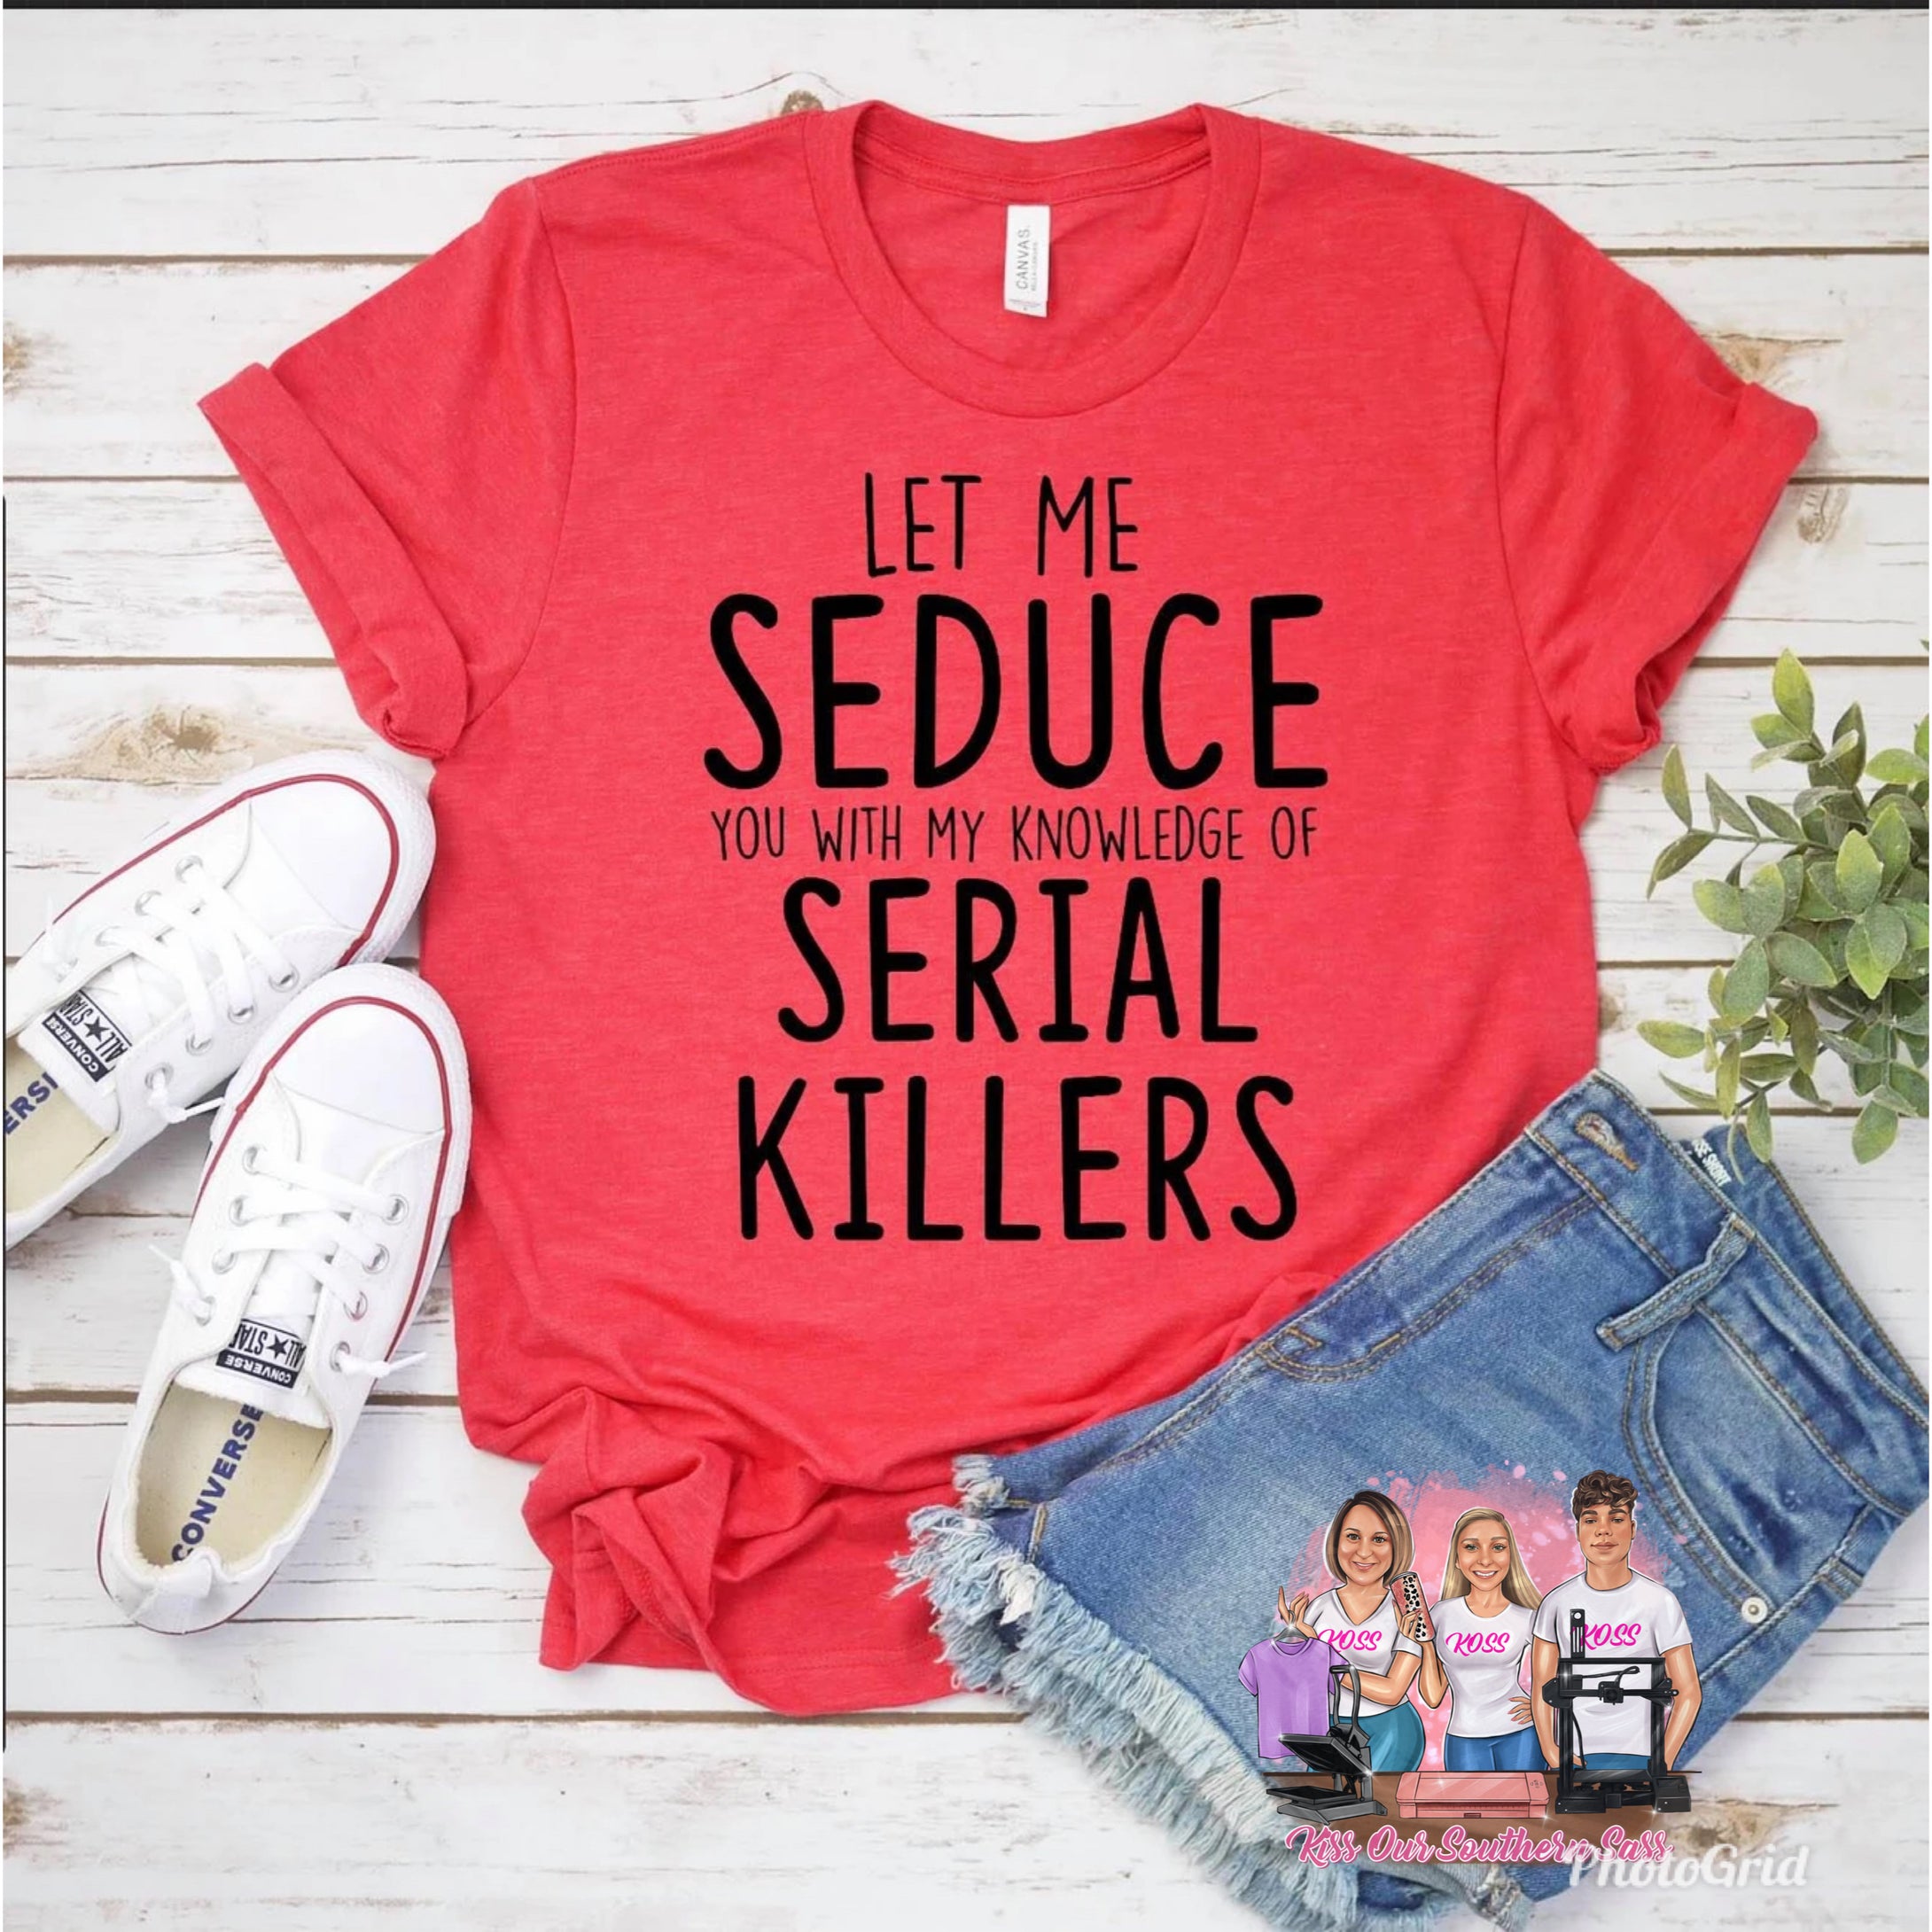 Let me seduce you with my knowledge of serial killers